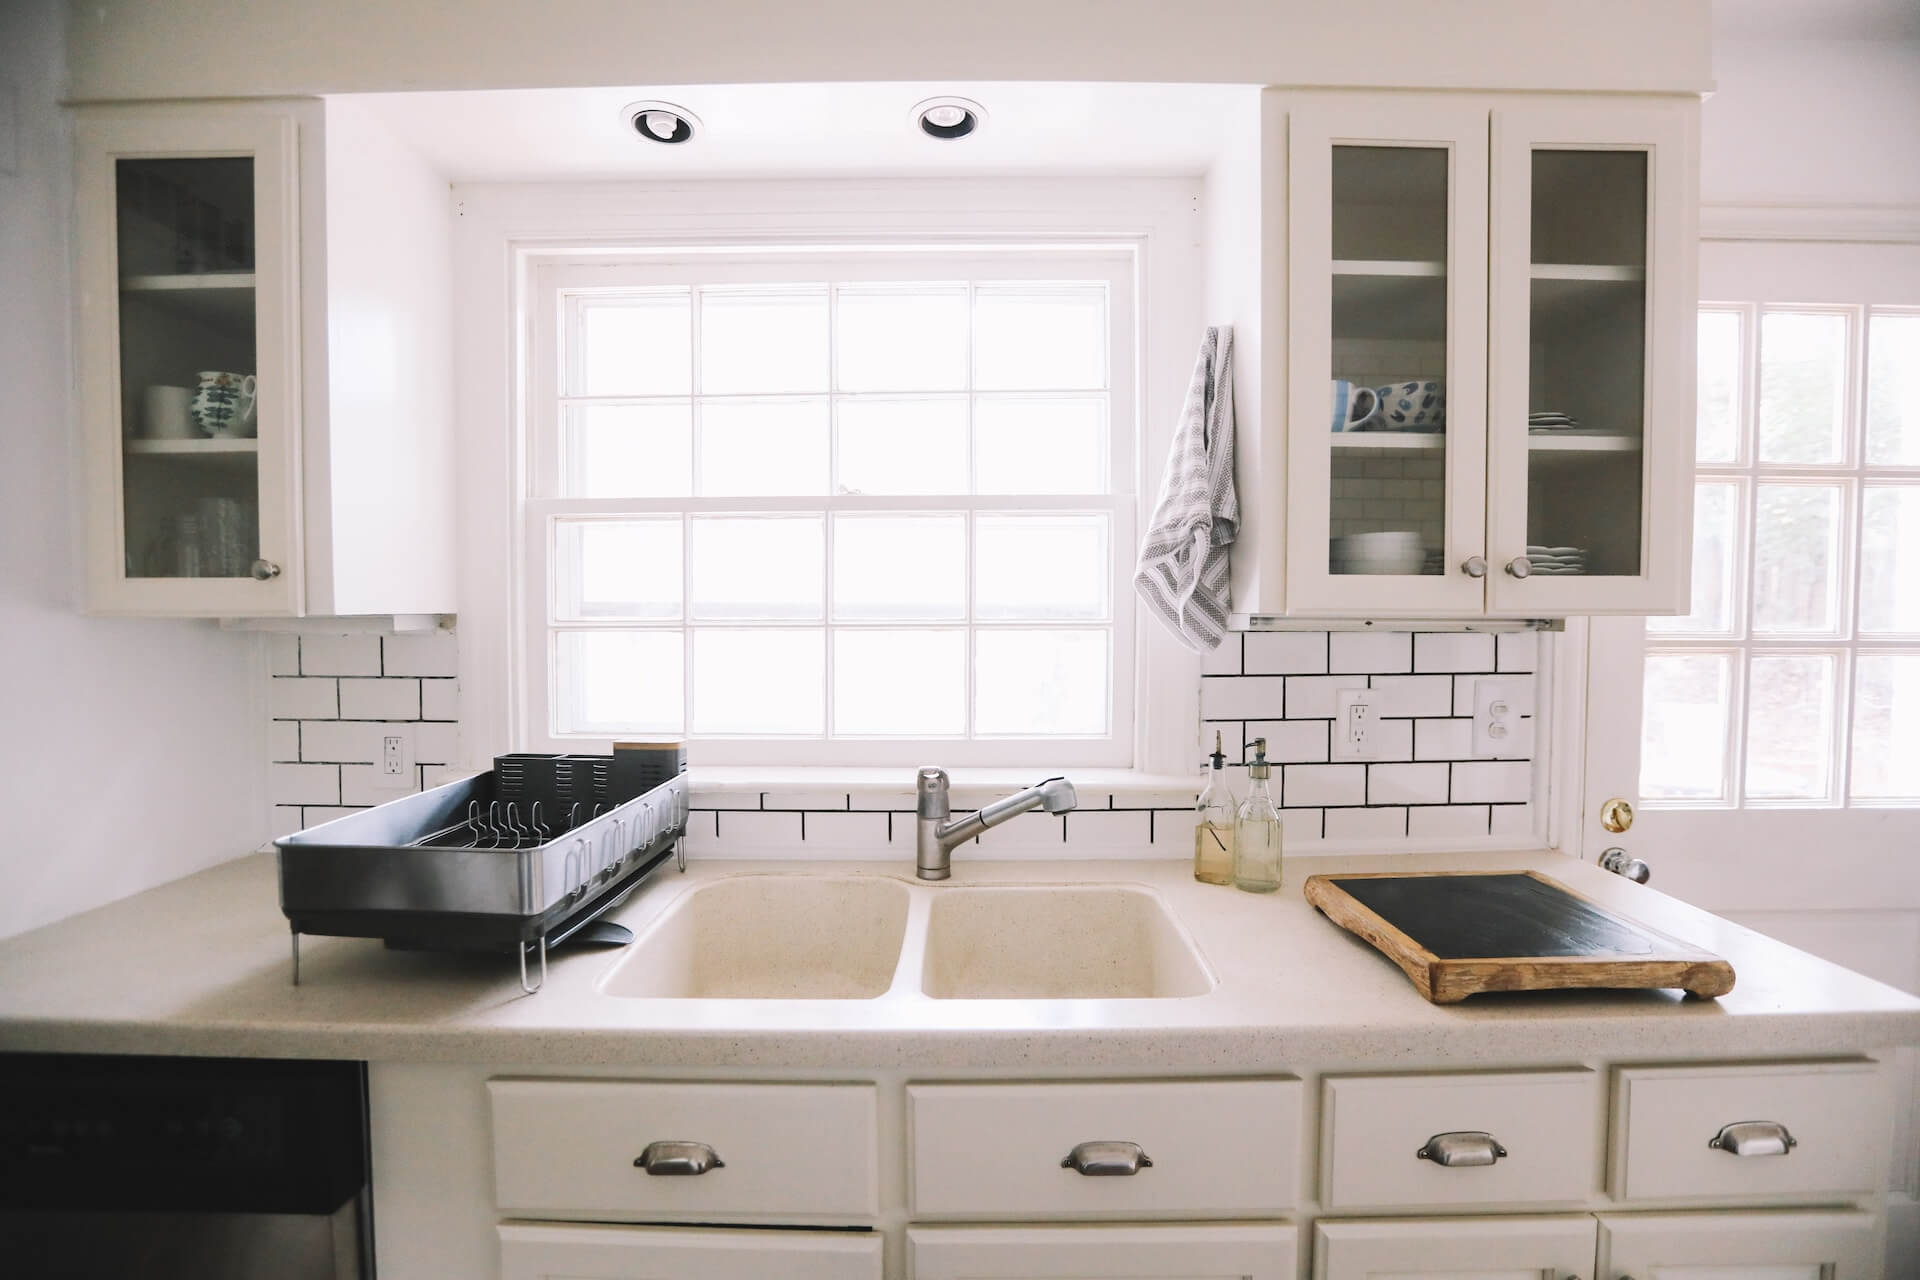 Kitchen with bold white colour, white and black kitchen units. Including tiled backdrop